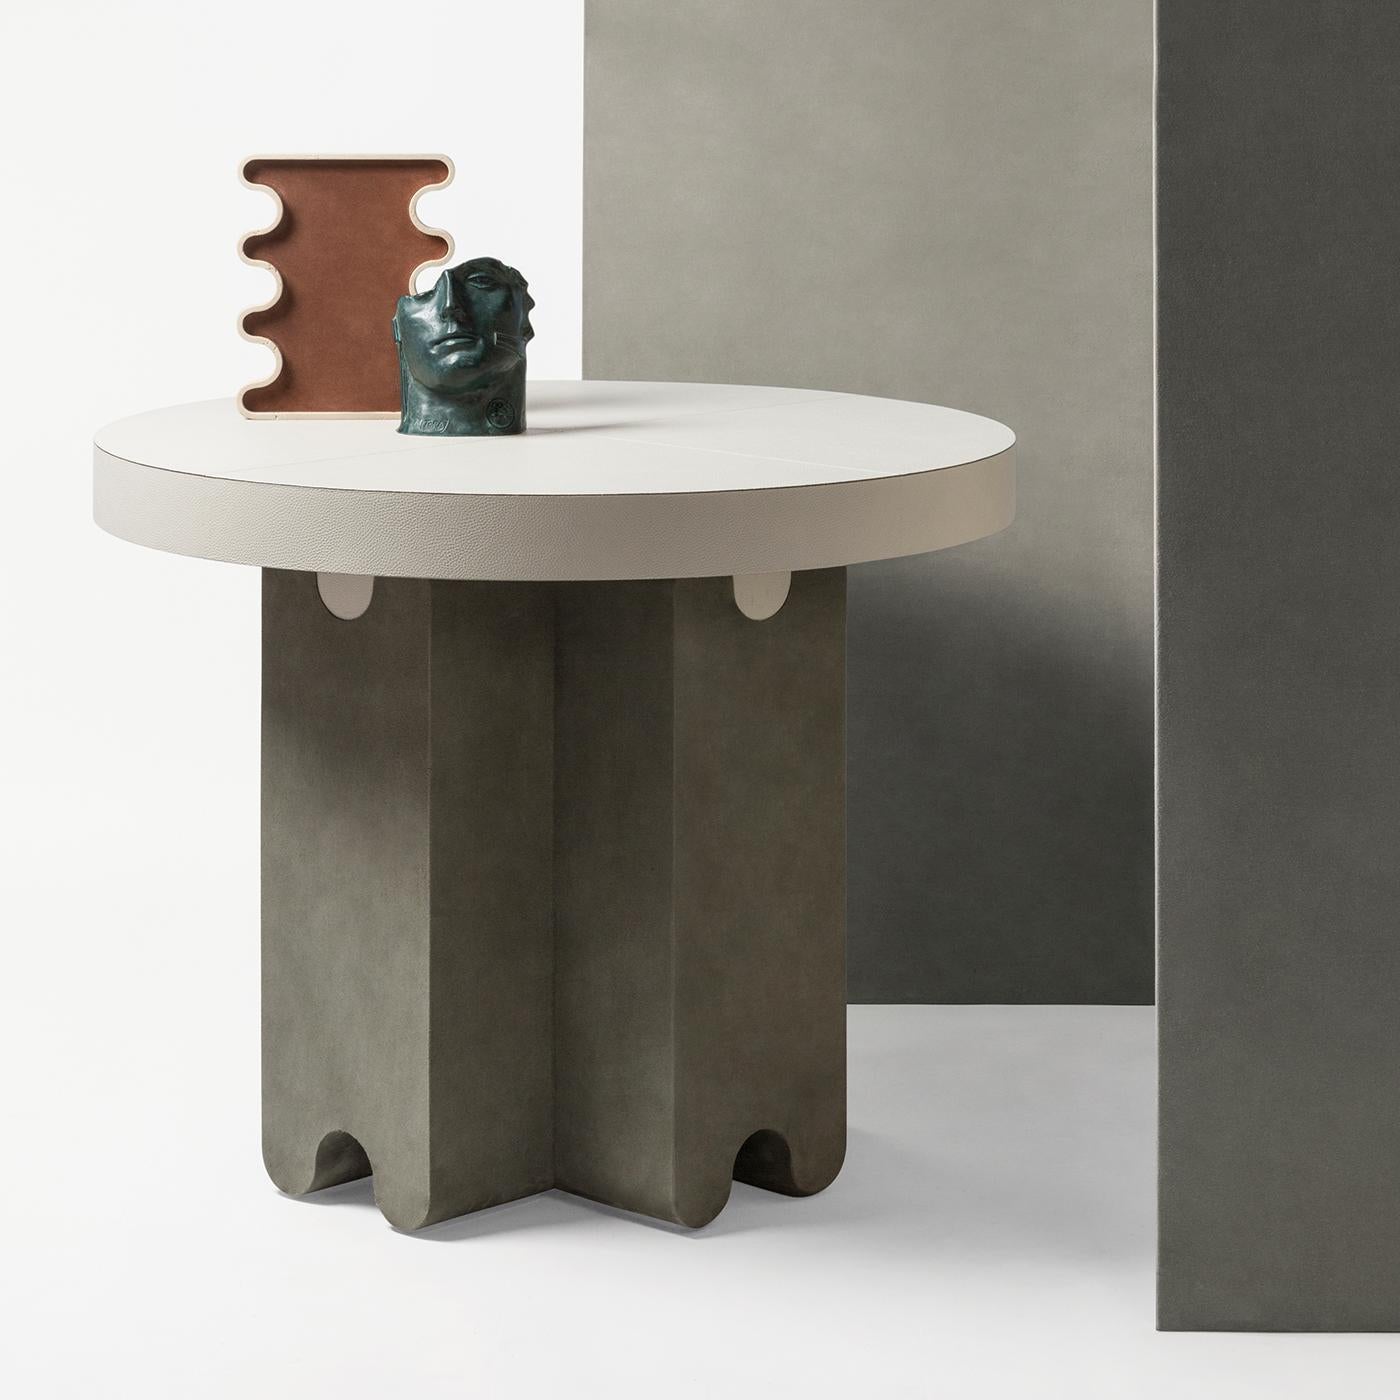 Contemporary leather side table - ossicle by Francesco Balzano for Giobagnara.
The object presented in the image has following finish: F95 Off white nappa leather (top) and A69 sage suede leather (base).

Ossicle is a collection that comprises